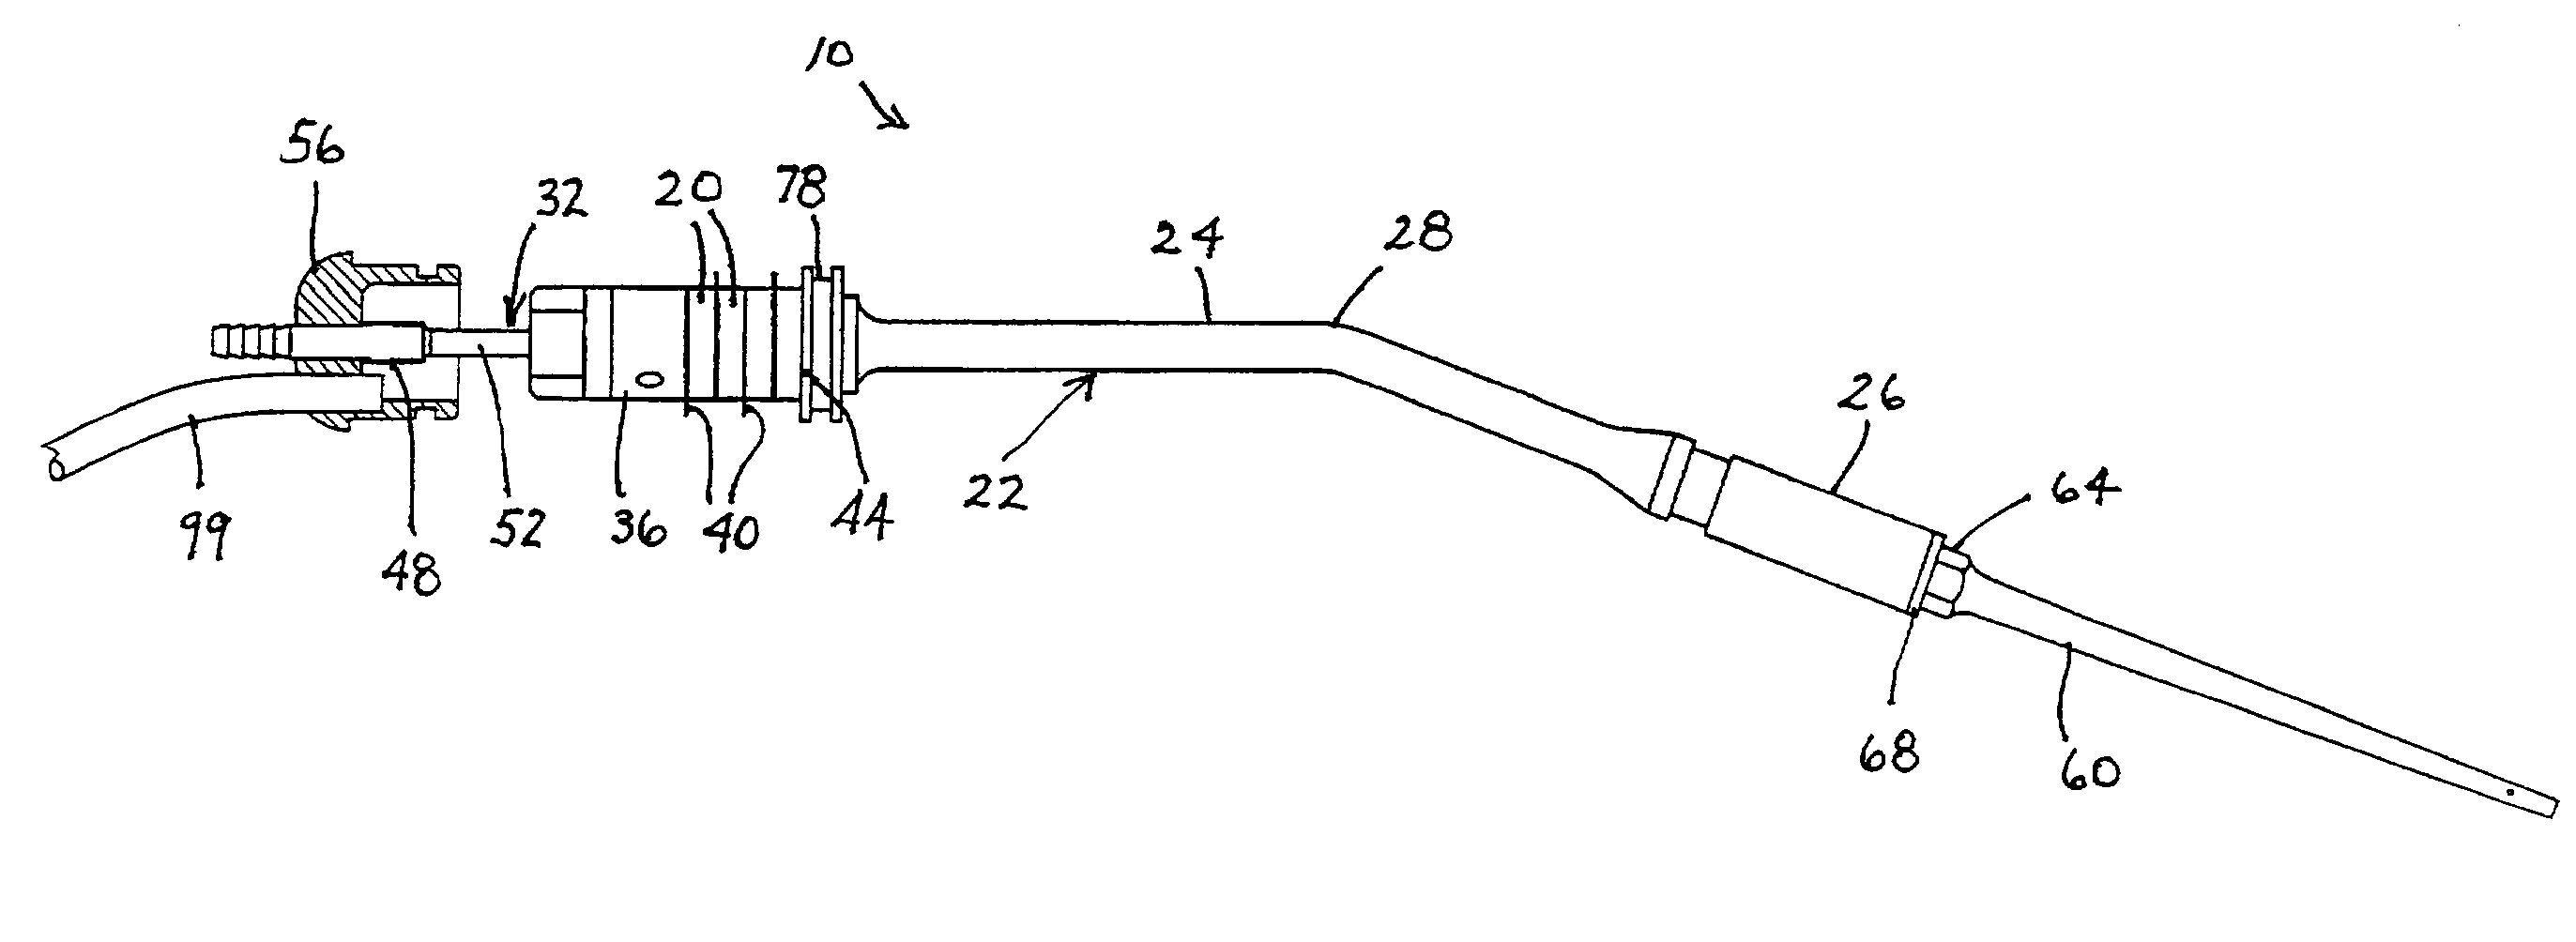 High efficiency medical transducer with ergonomic shape and method of manufacture